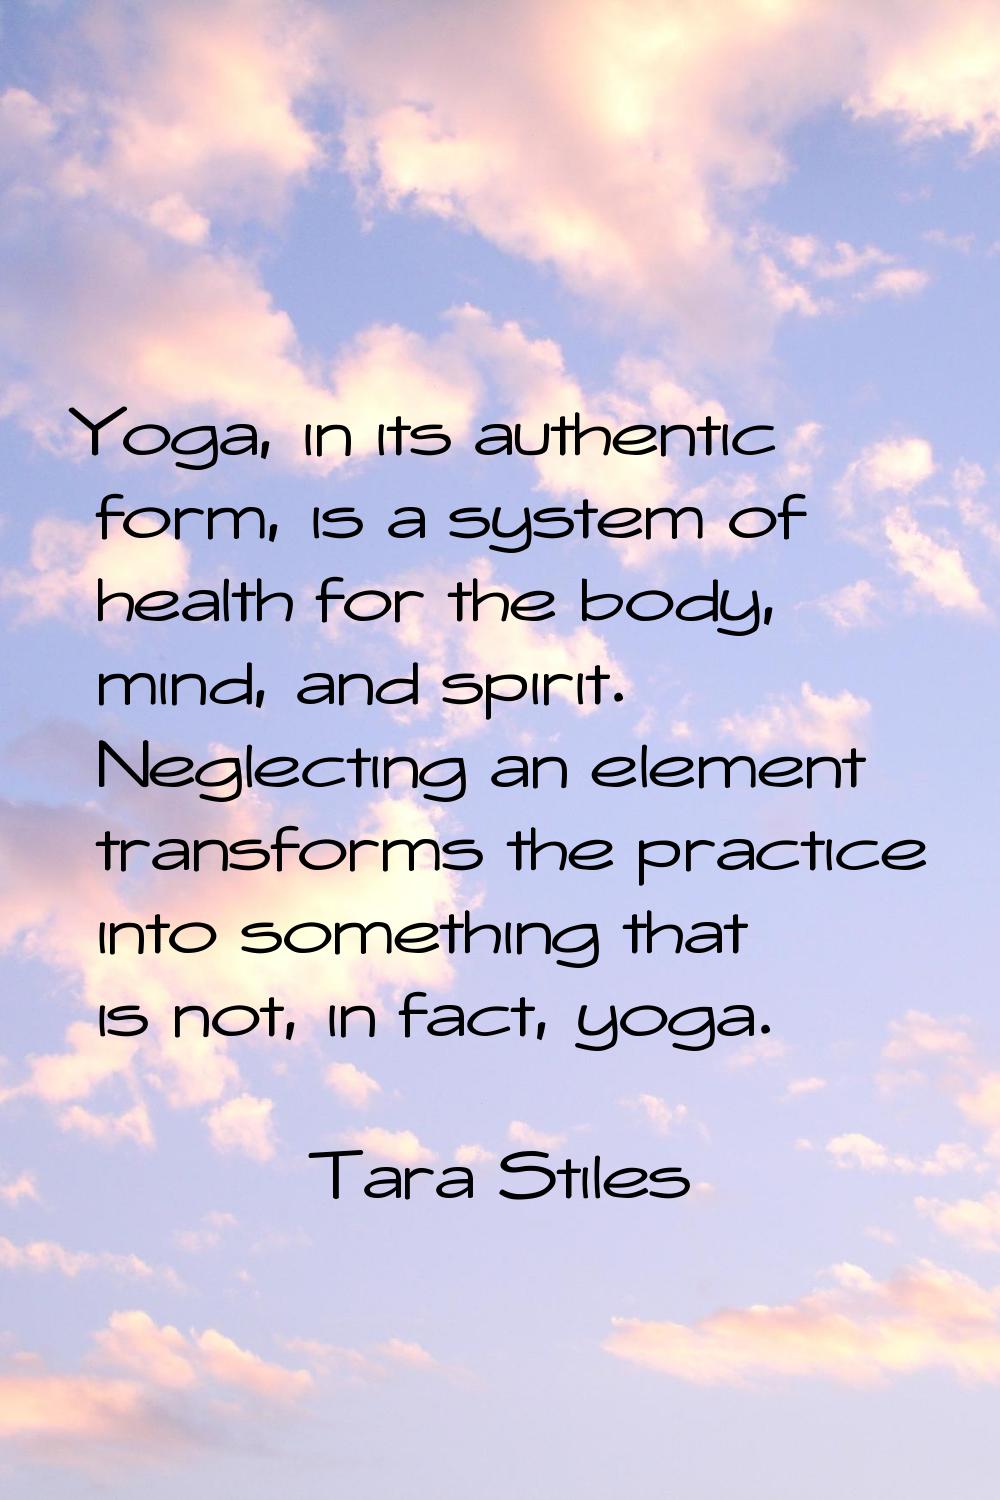 Yoga, in its authentic form, is a system of health for the body, mind, and spirit. Neglecting an el